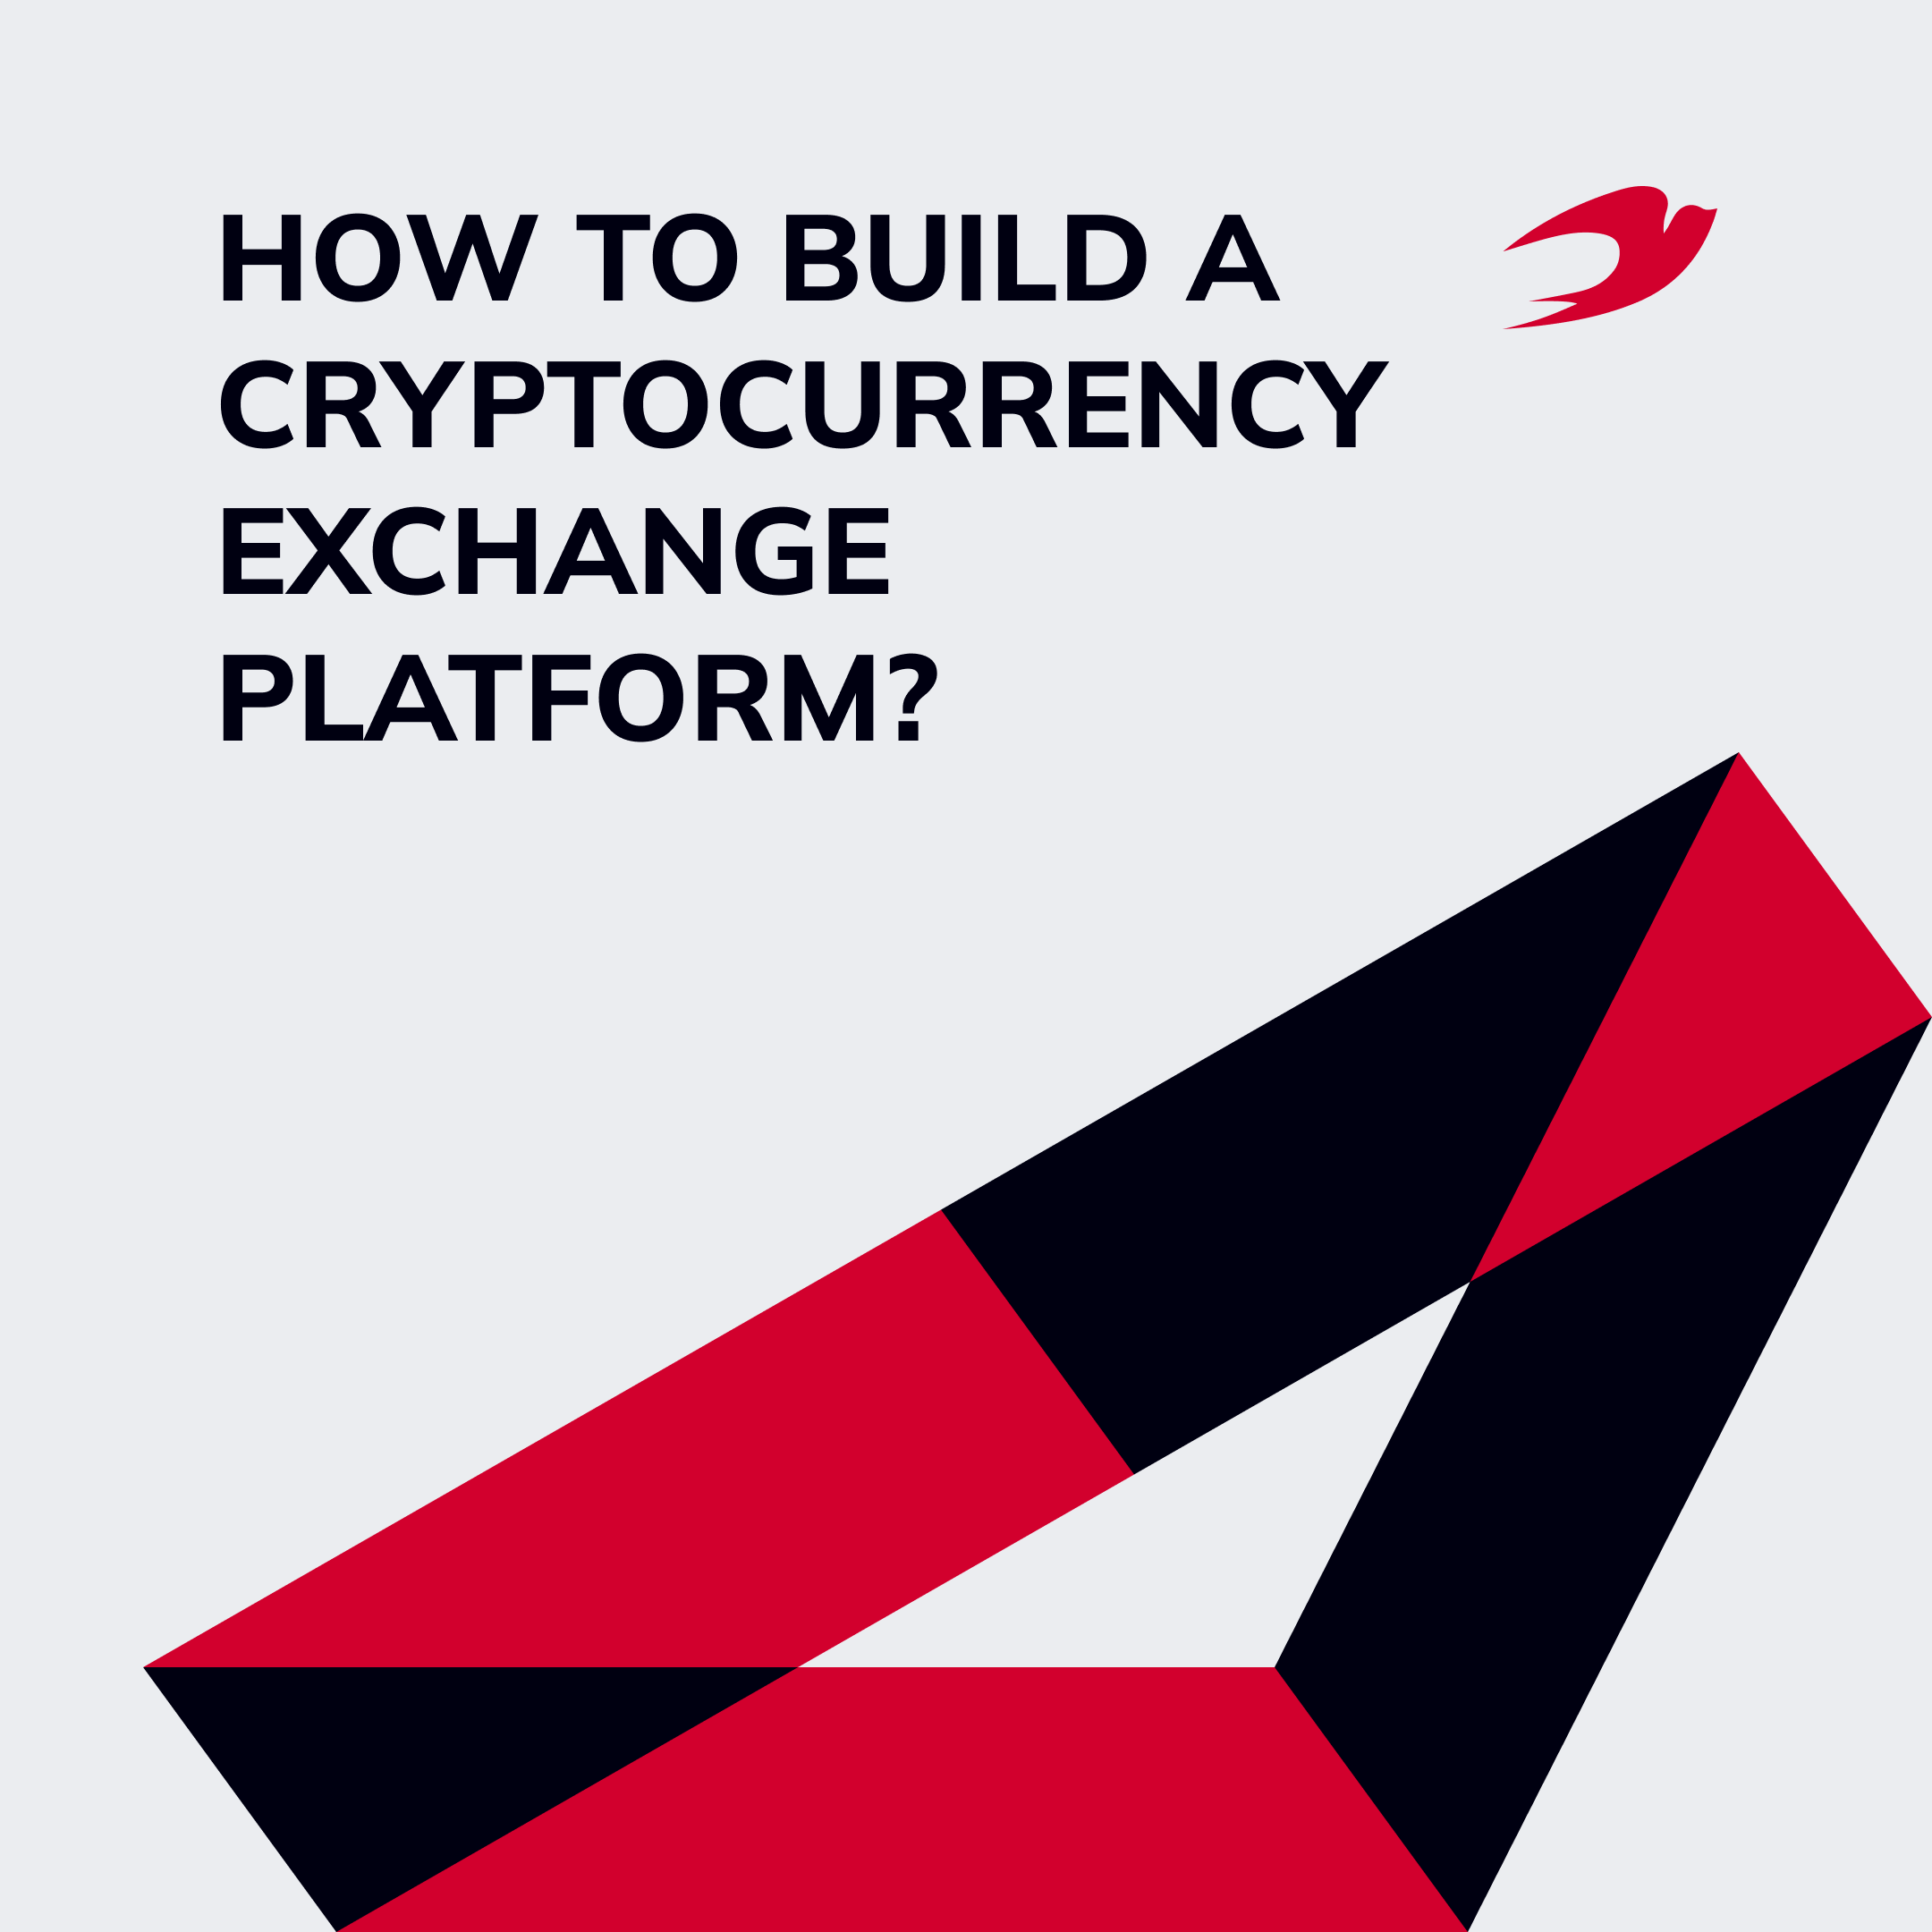 How to Build a Cryptocurrency Exchange Platform